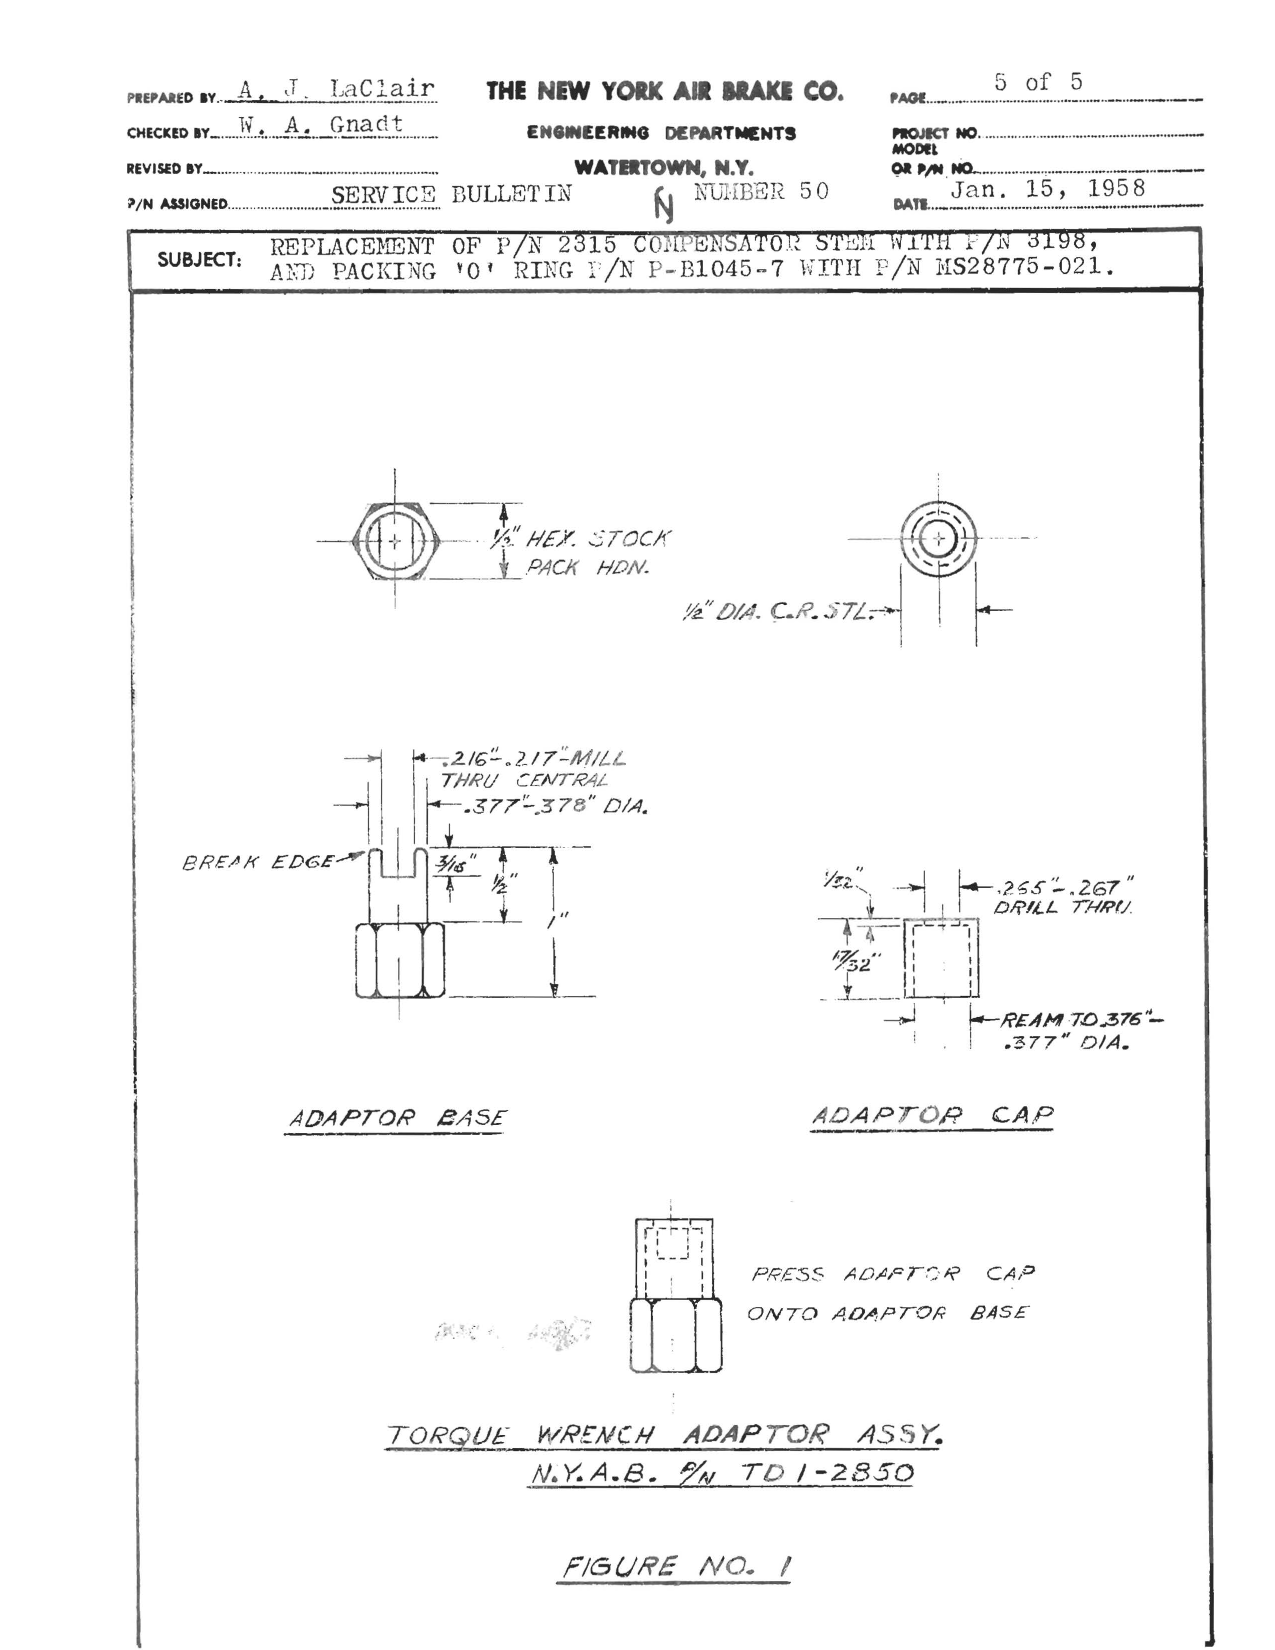 Sample page 5 from AirCorps Library document: Replacement of Part 2315 Compensator Stem with Part 3198 and Packing O Ring Part P-B1045-7 with MS28775-021